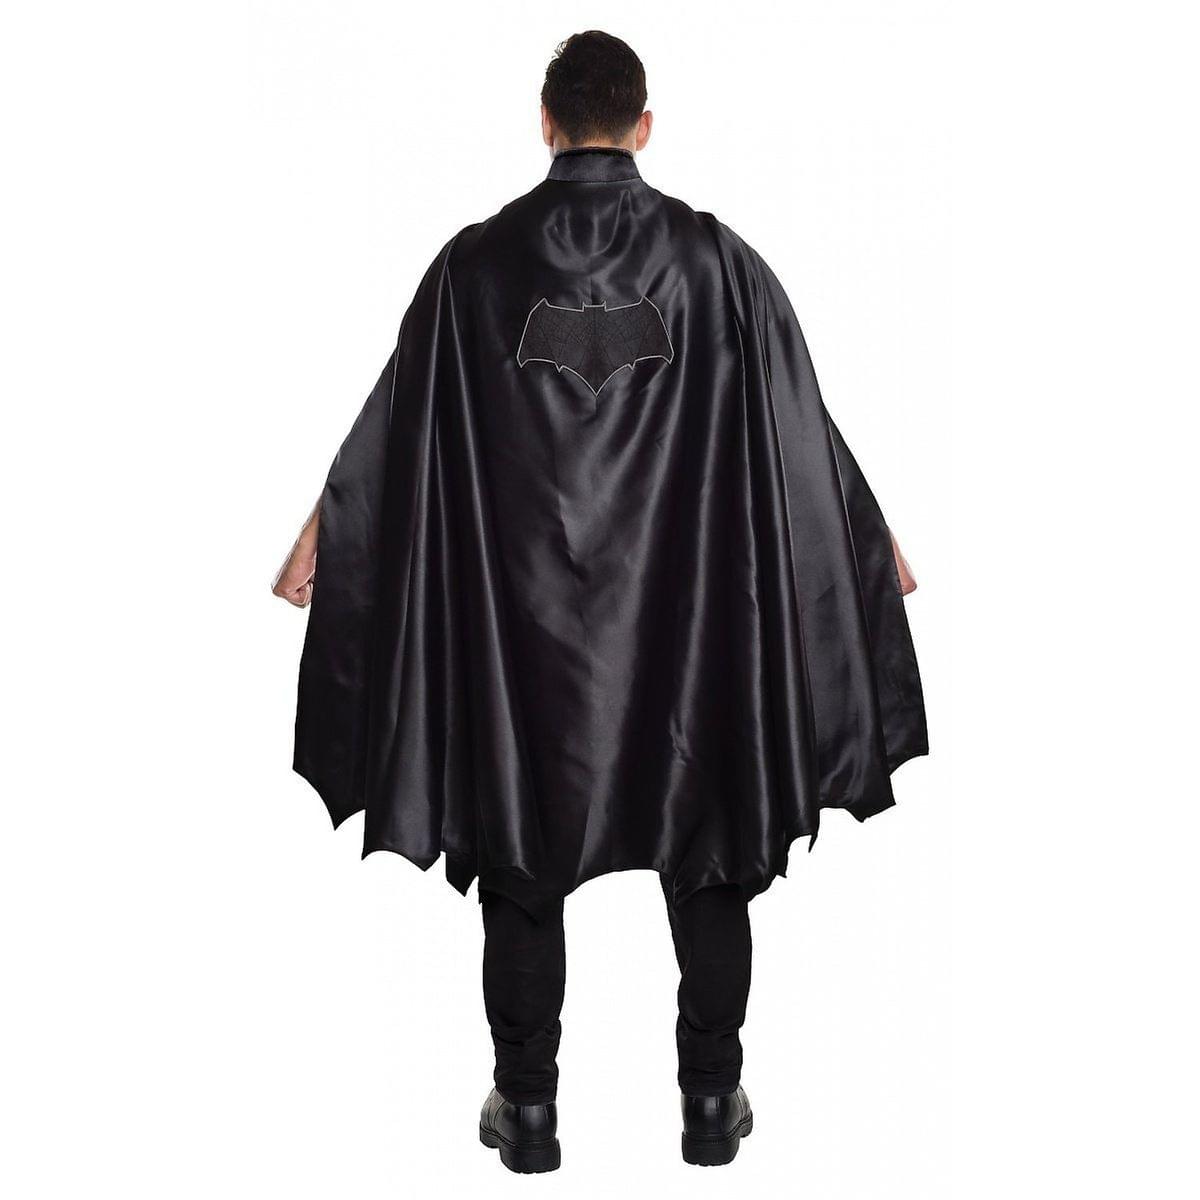 Dawn Of Justice Deluxe Batman Costume Cape Adult One Size